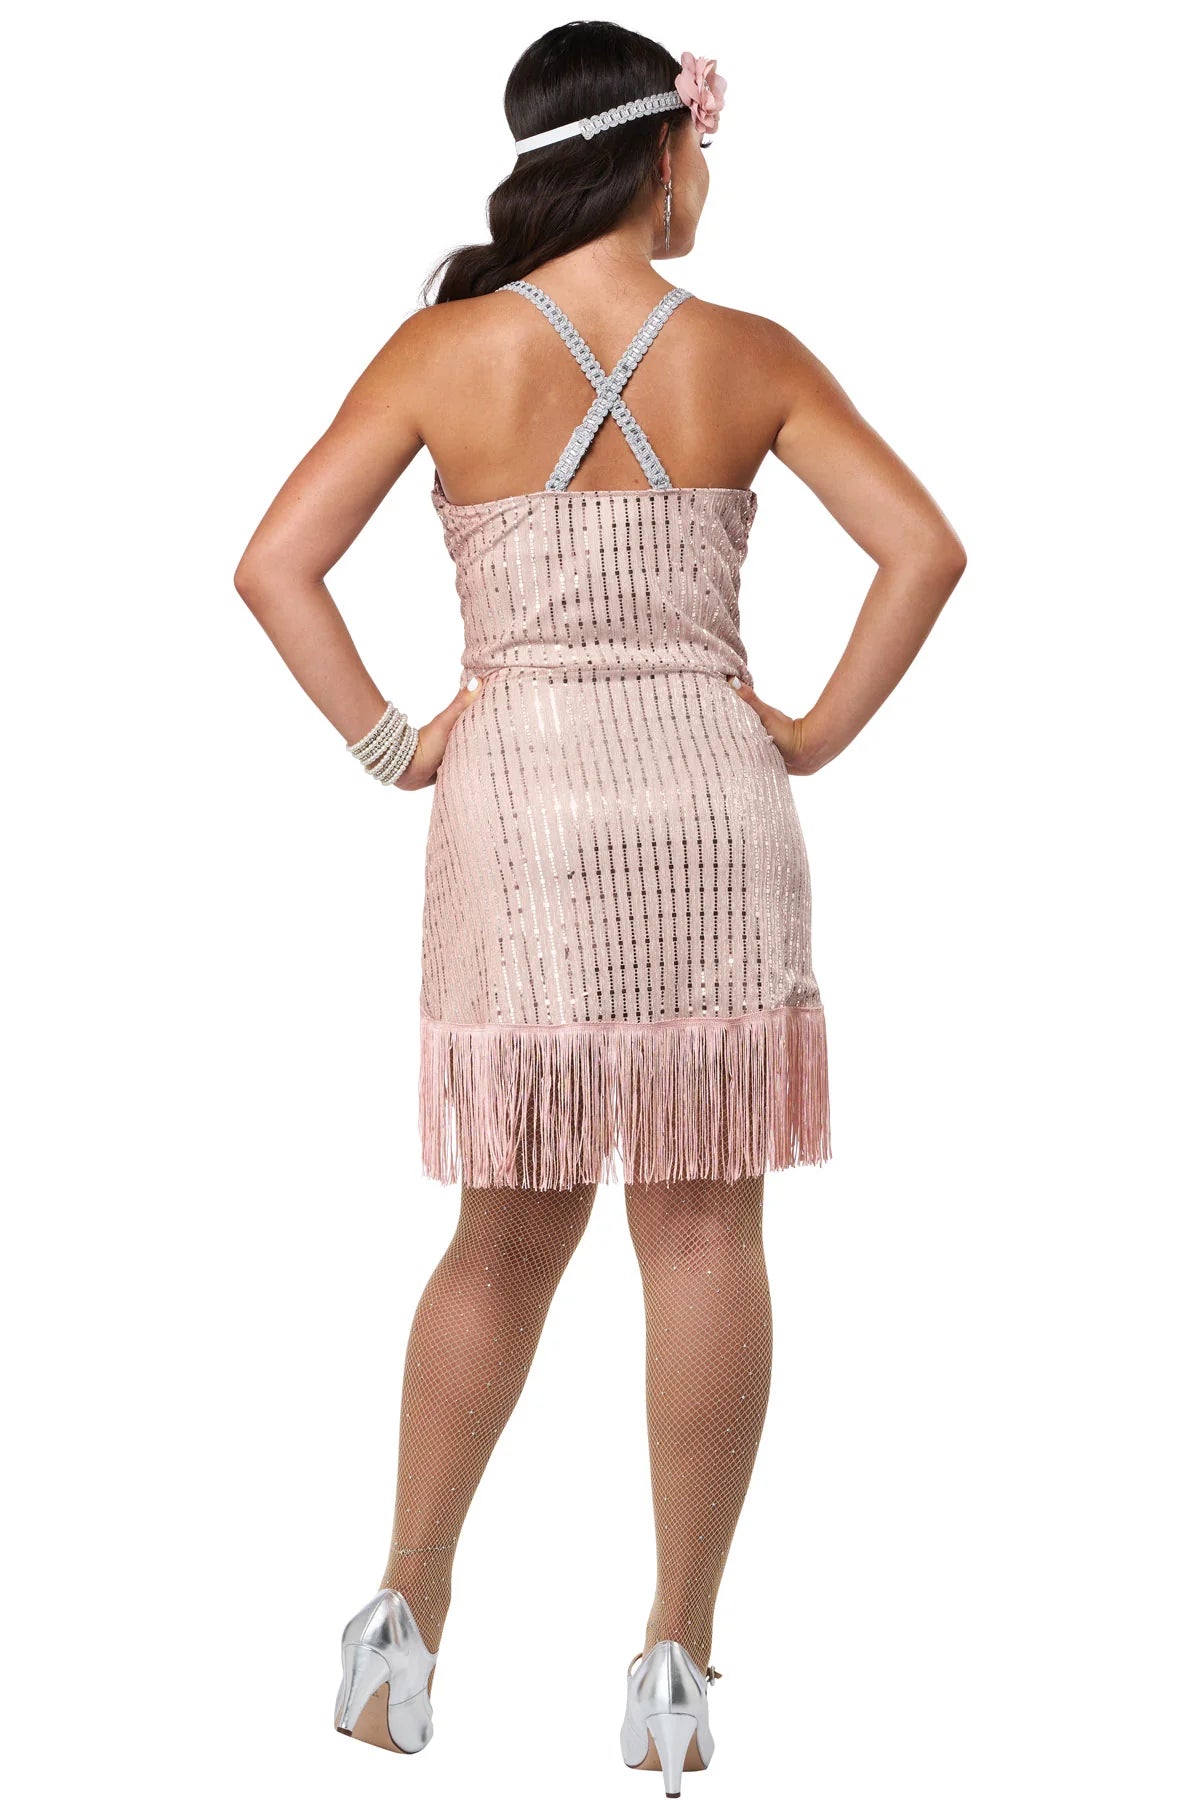 She's The Bees Knees 20's Flapper Adult Costume